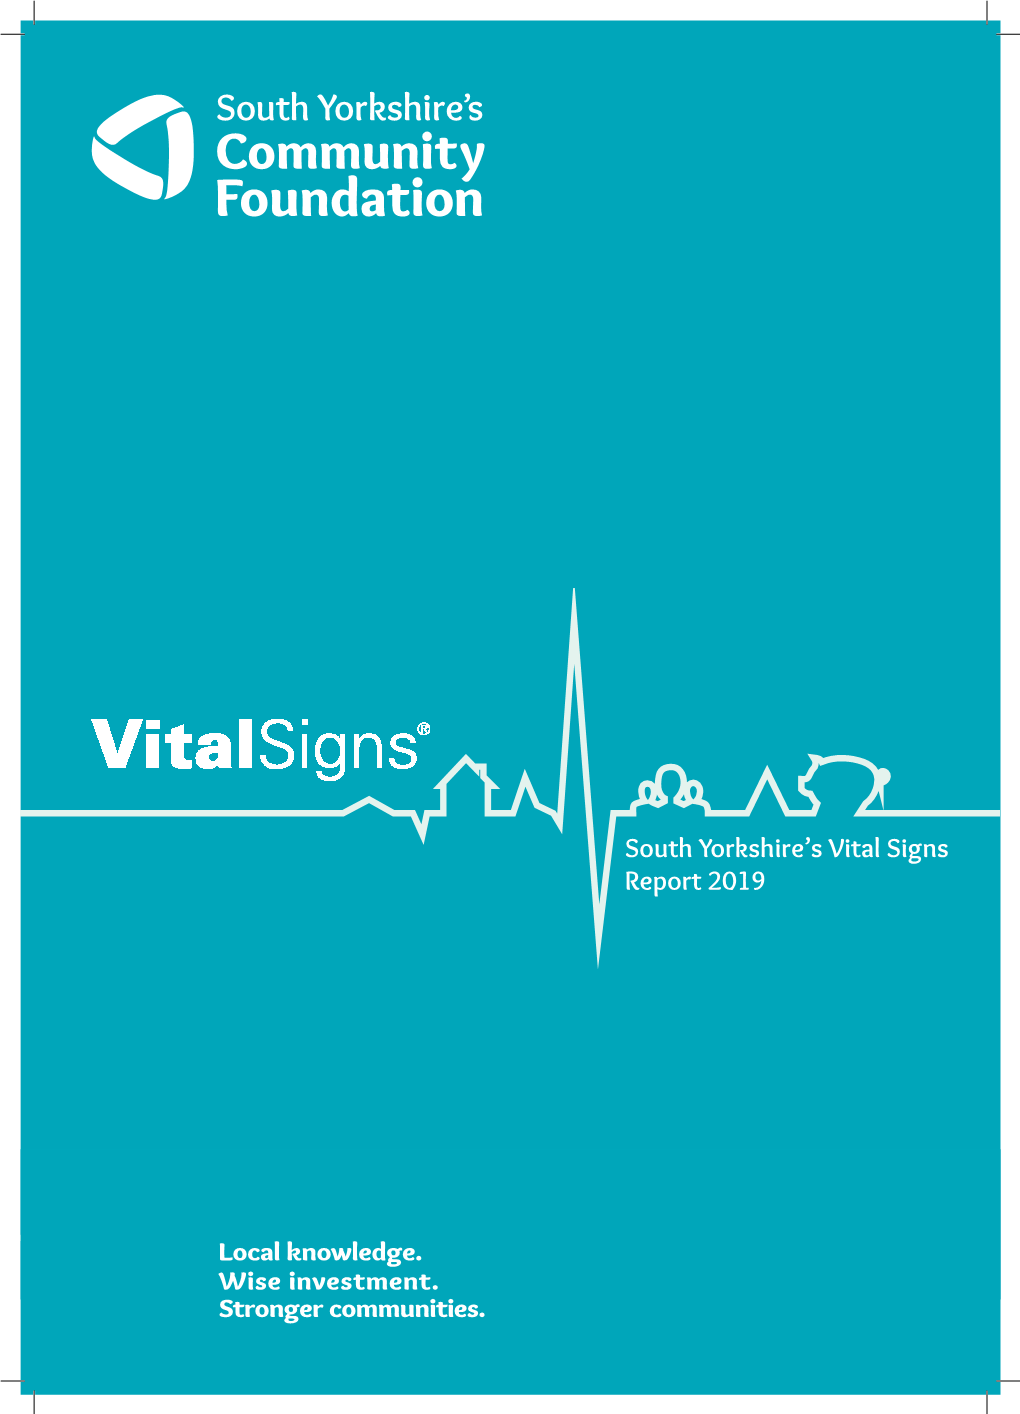 South Yorkshire's Vital Signs Report 2019